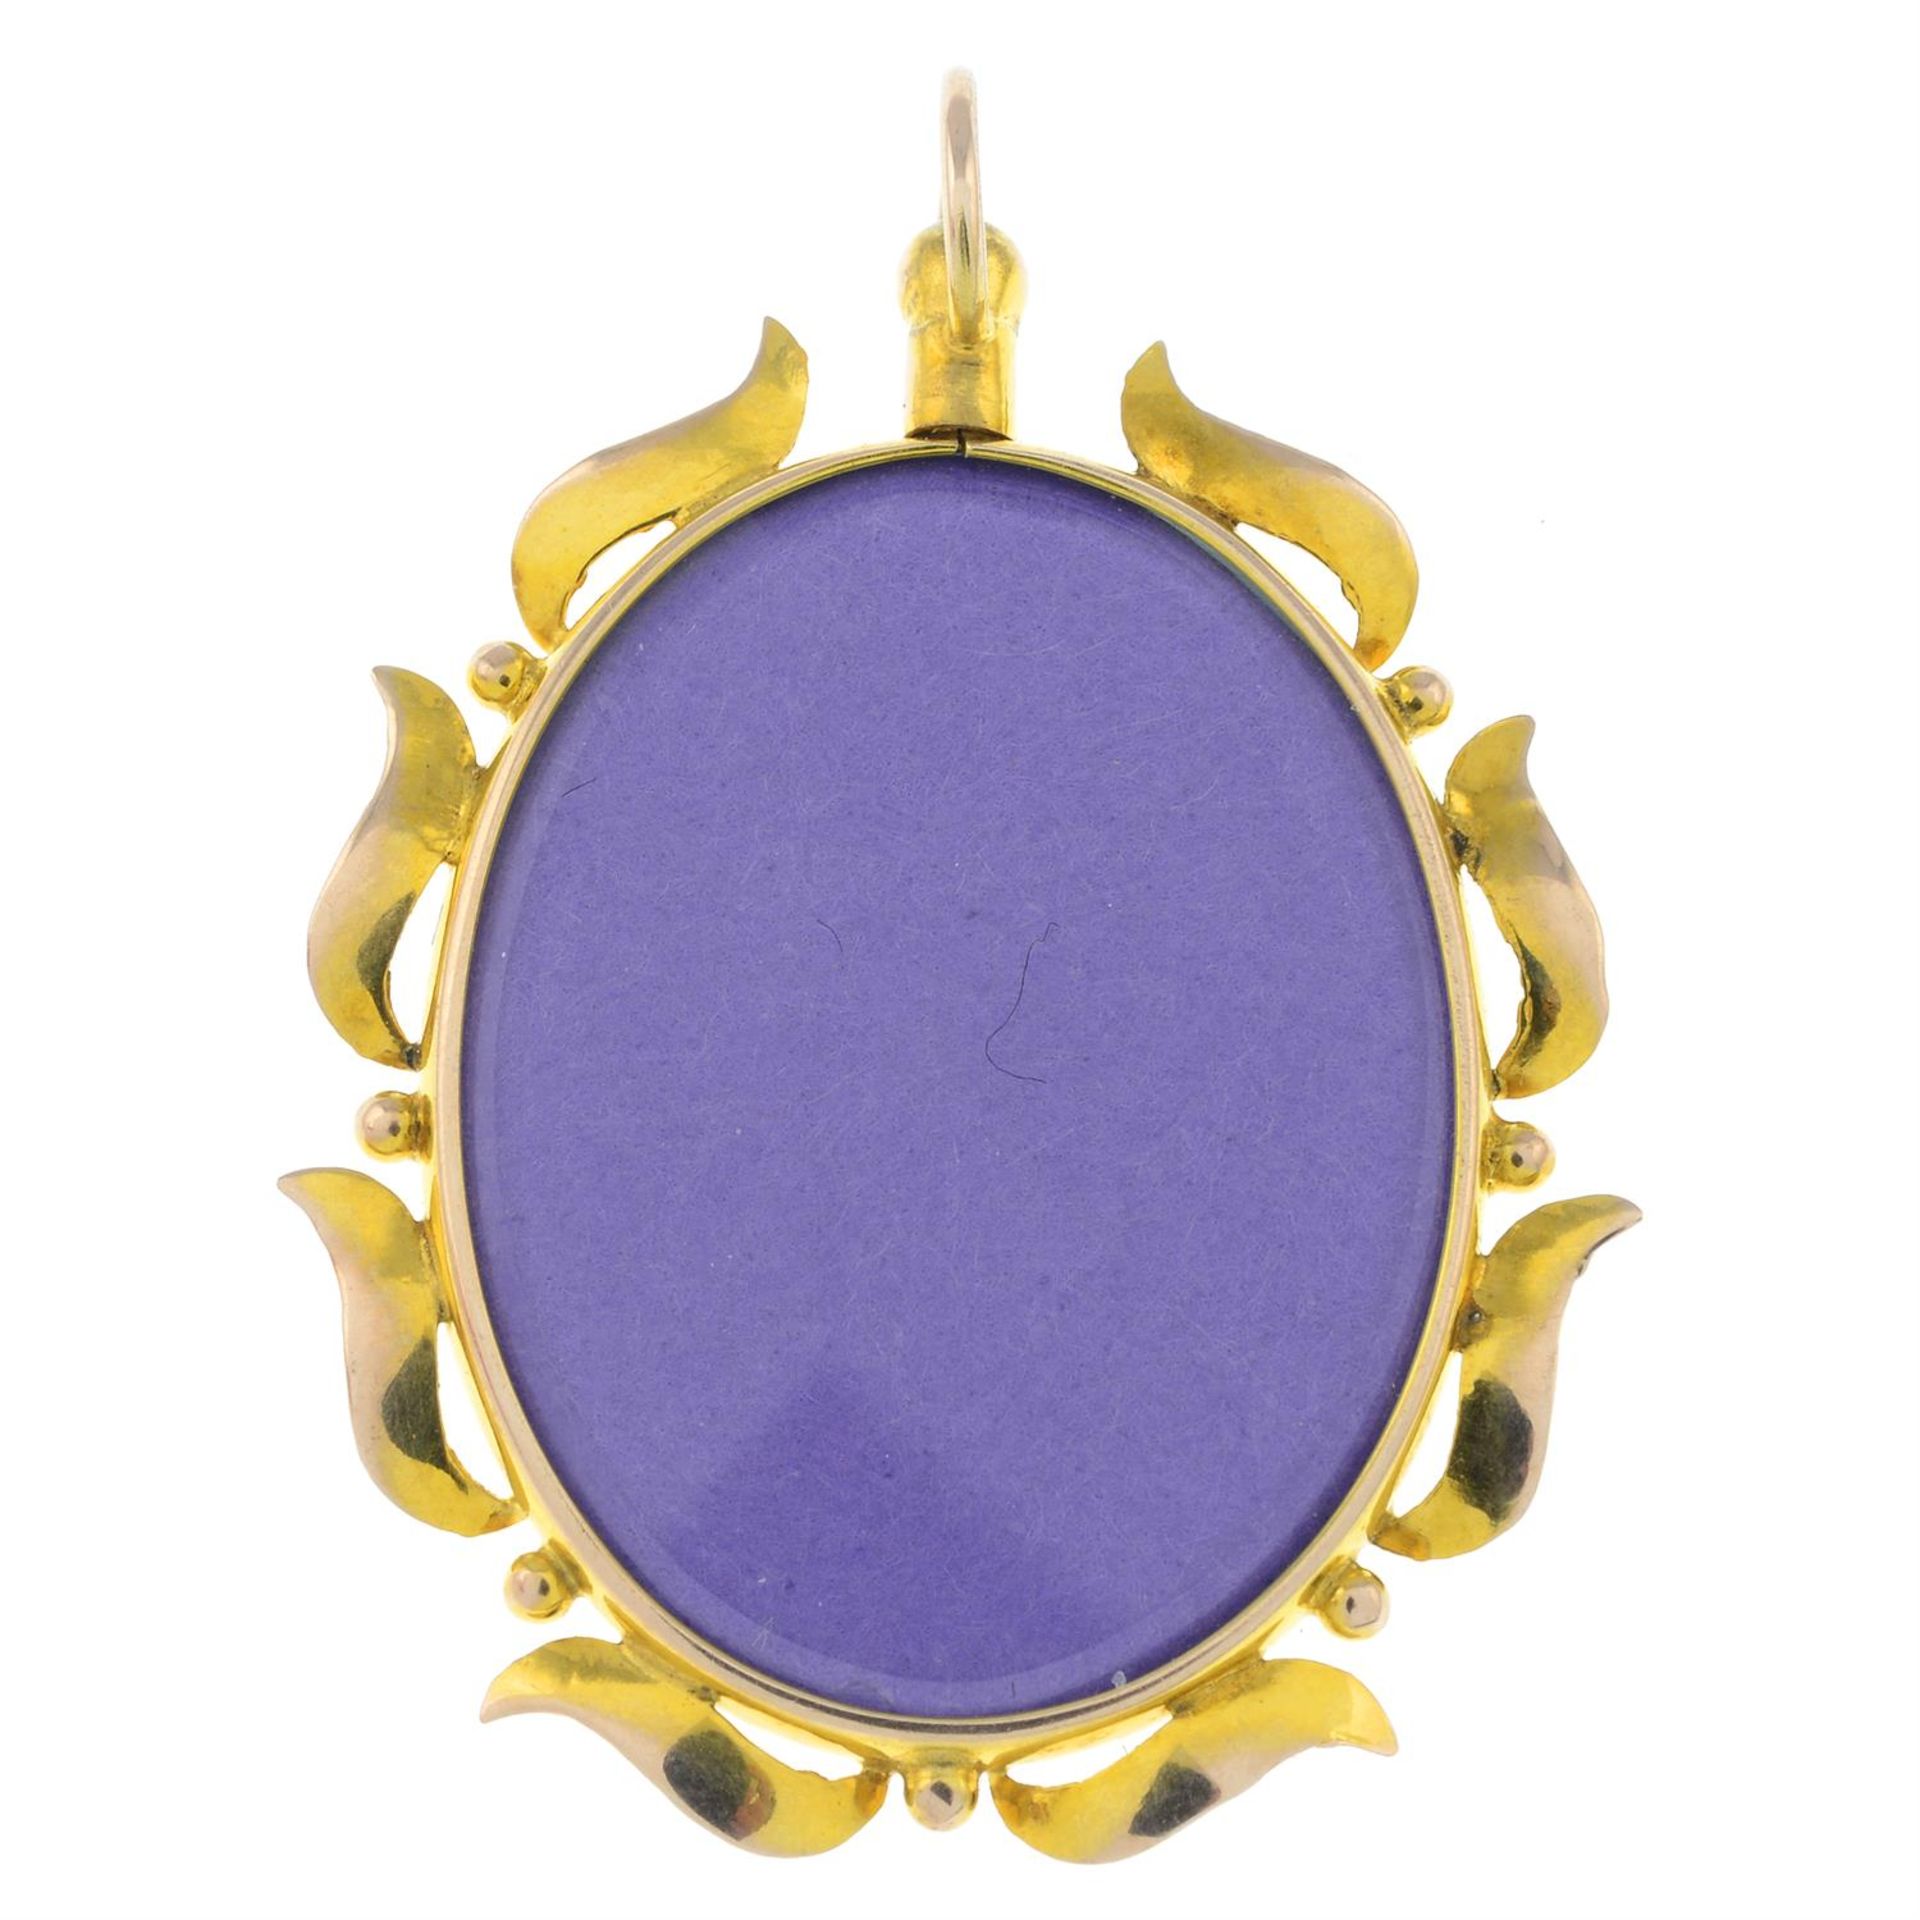 An early 20th century 9ct gold locket pendant.